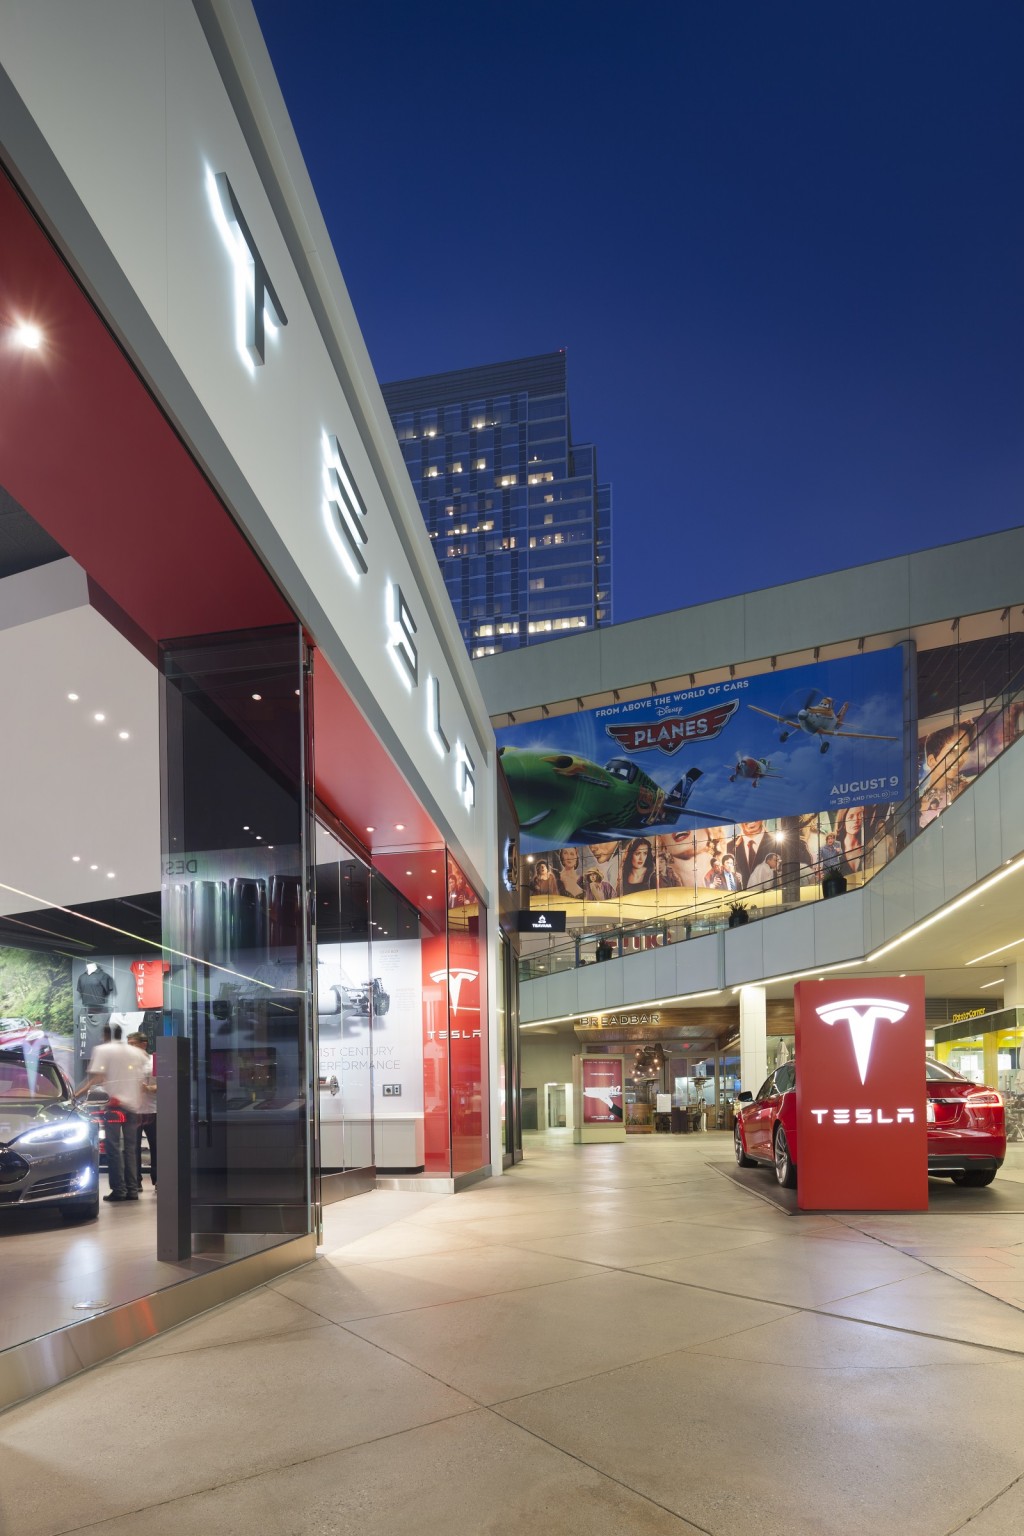 Tesla Begins Sales & Supercharging Blitz; Growth In Europe & Asia To Outpace North America By 2015